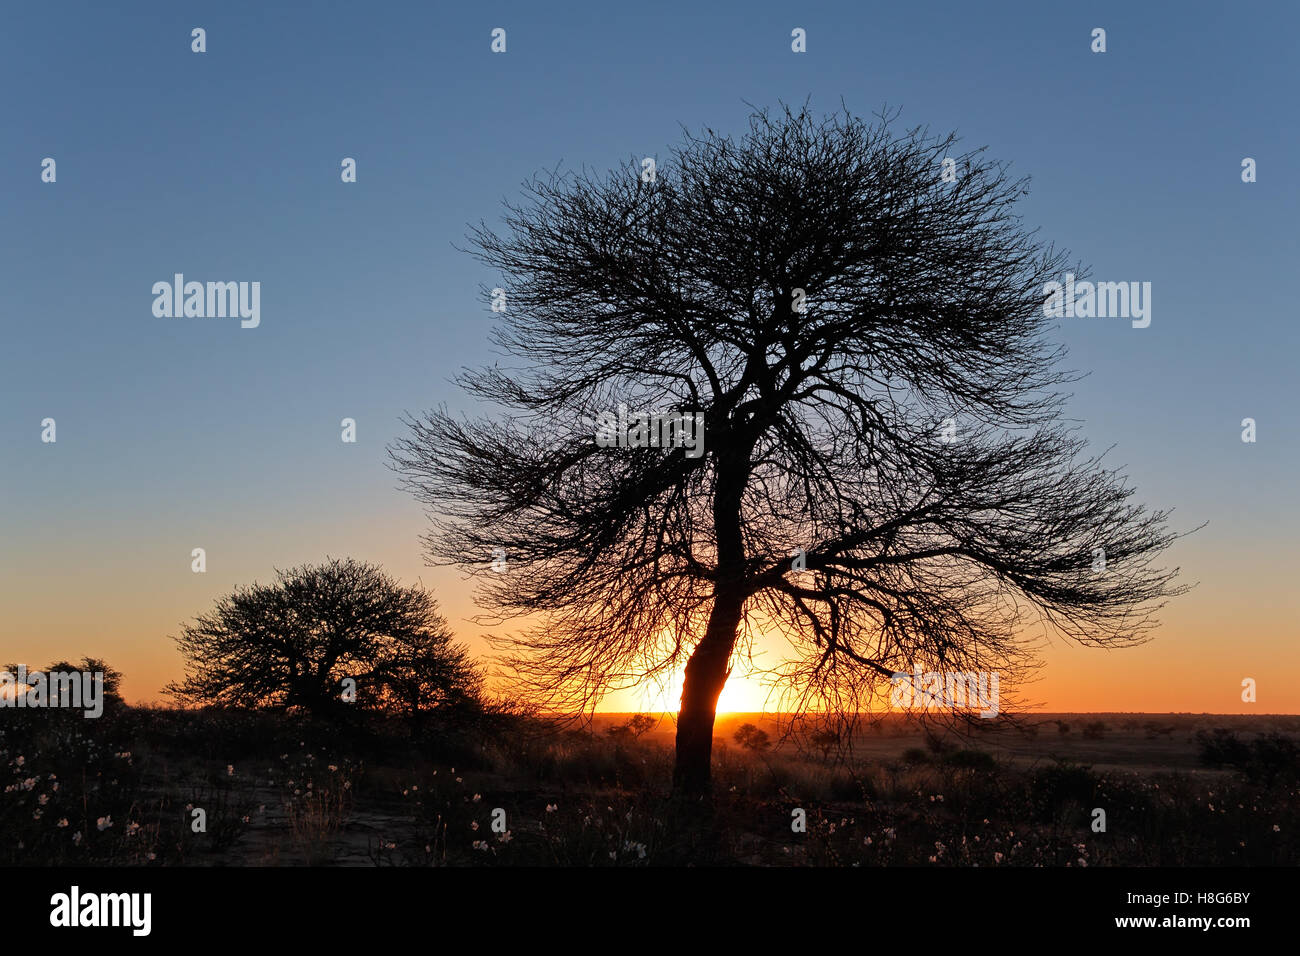 Sunset with silhouetted African thorn tree, Kalahari desert, South Africa Stock Photo